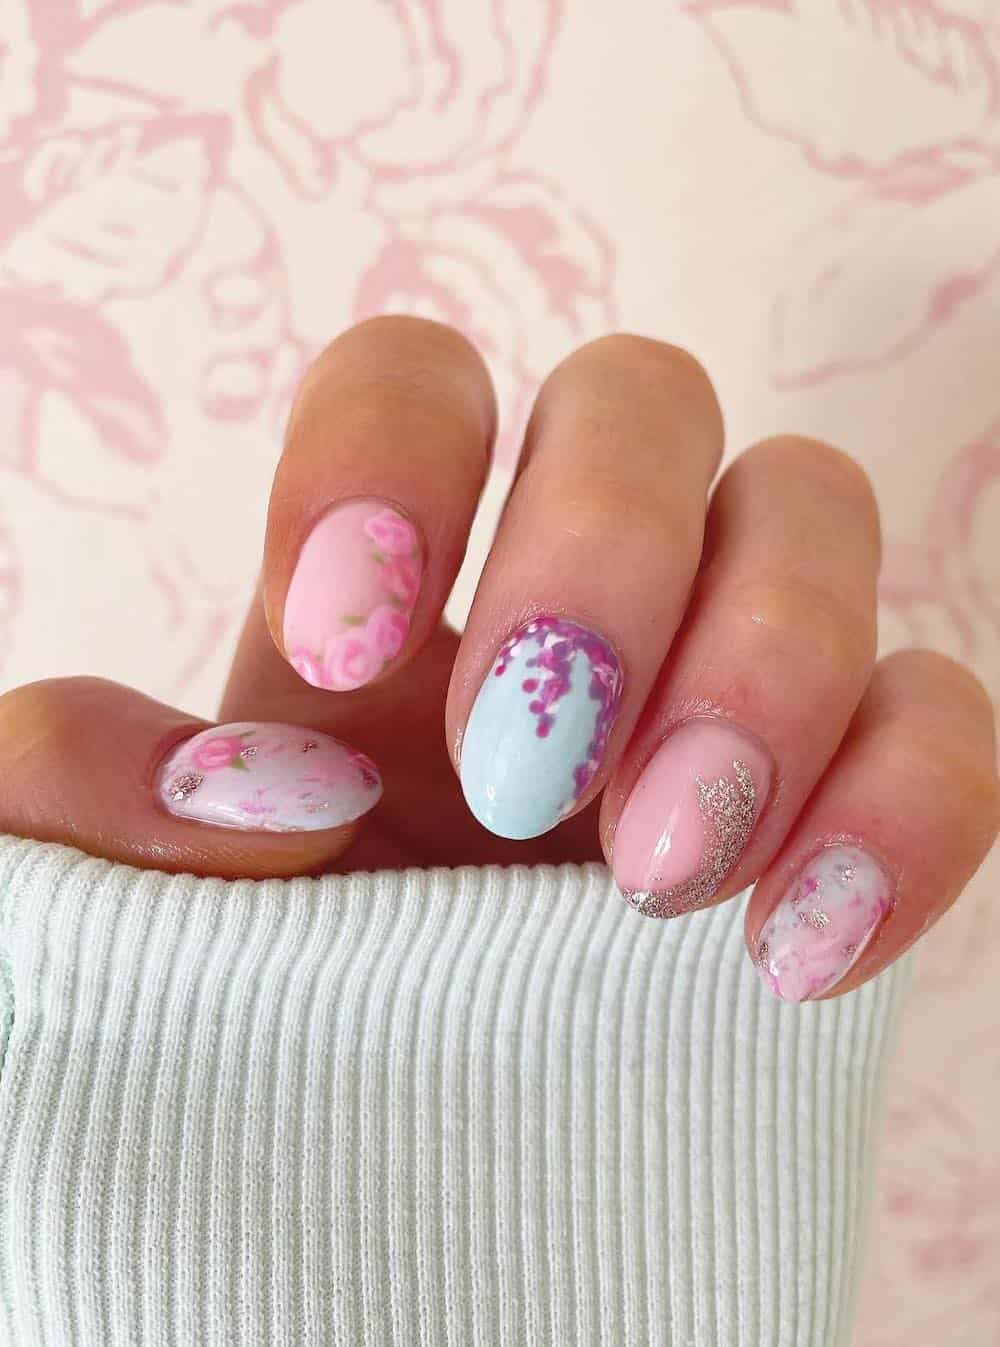 A hand with short round nails featuring pink, purple, and blue floral designs and glitter details